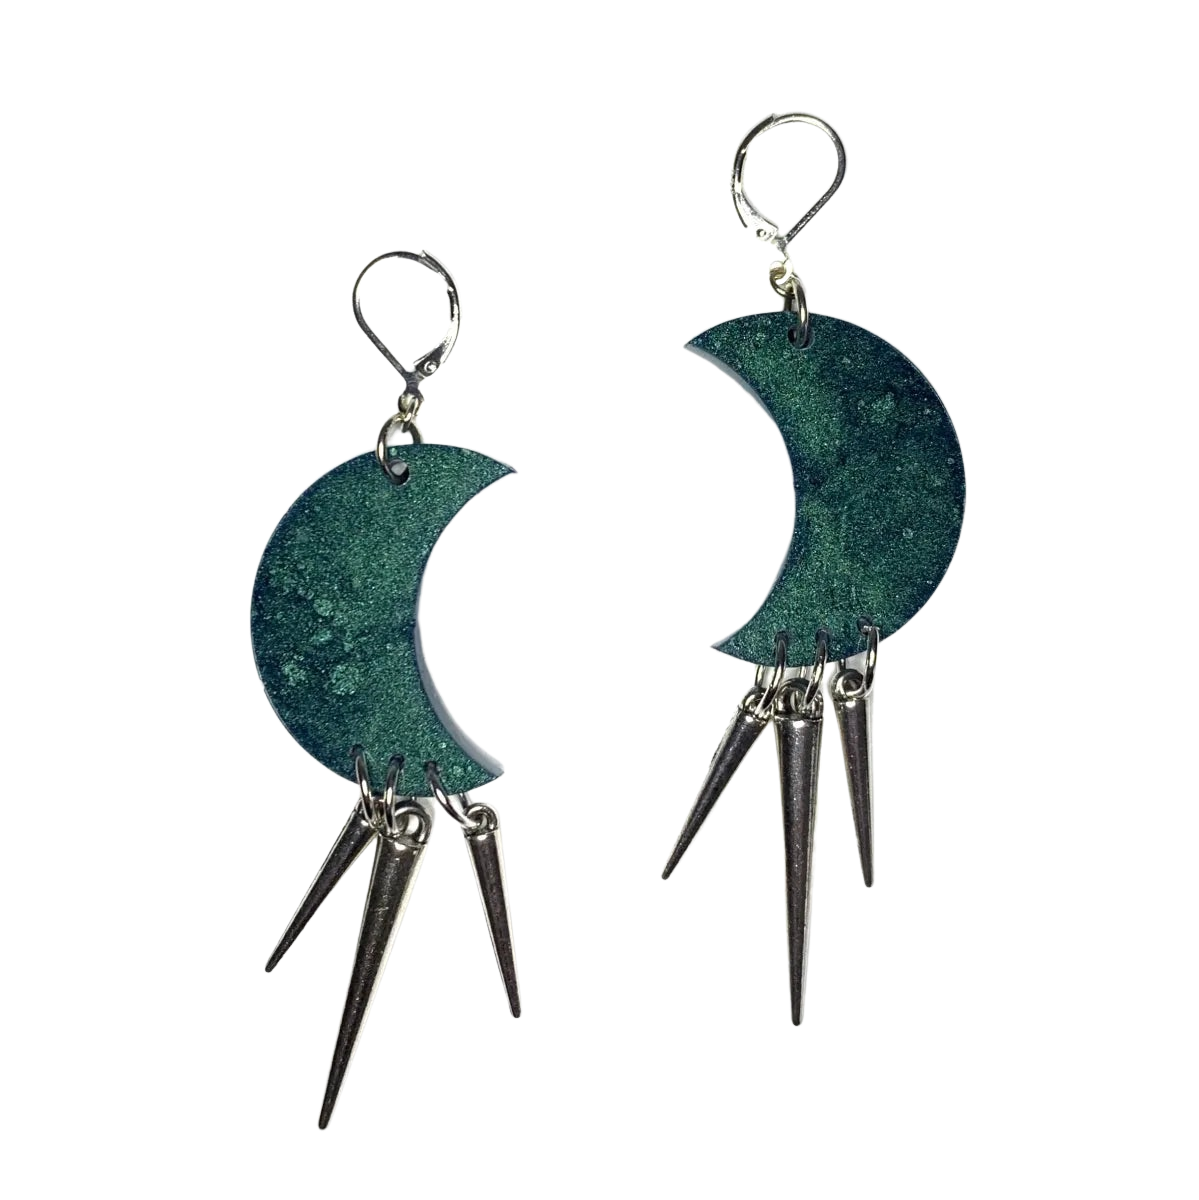 Metallic Green Moon Earrings with Spikes - Imperfect